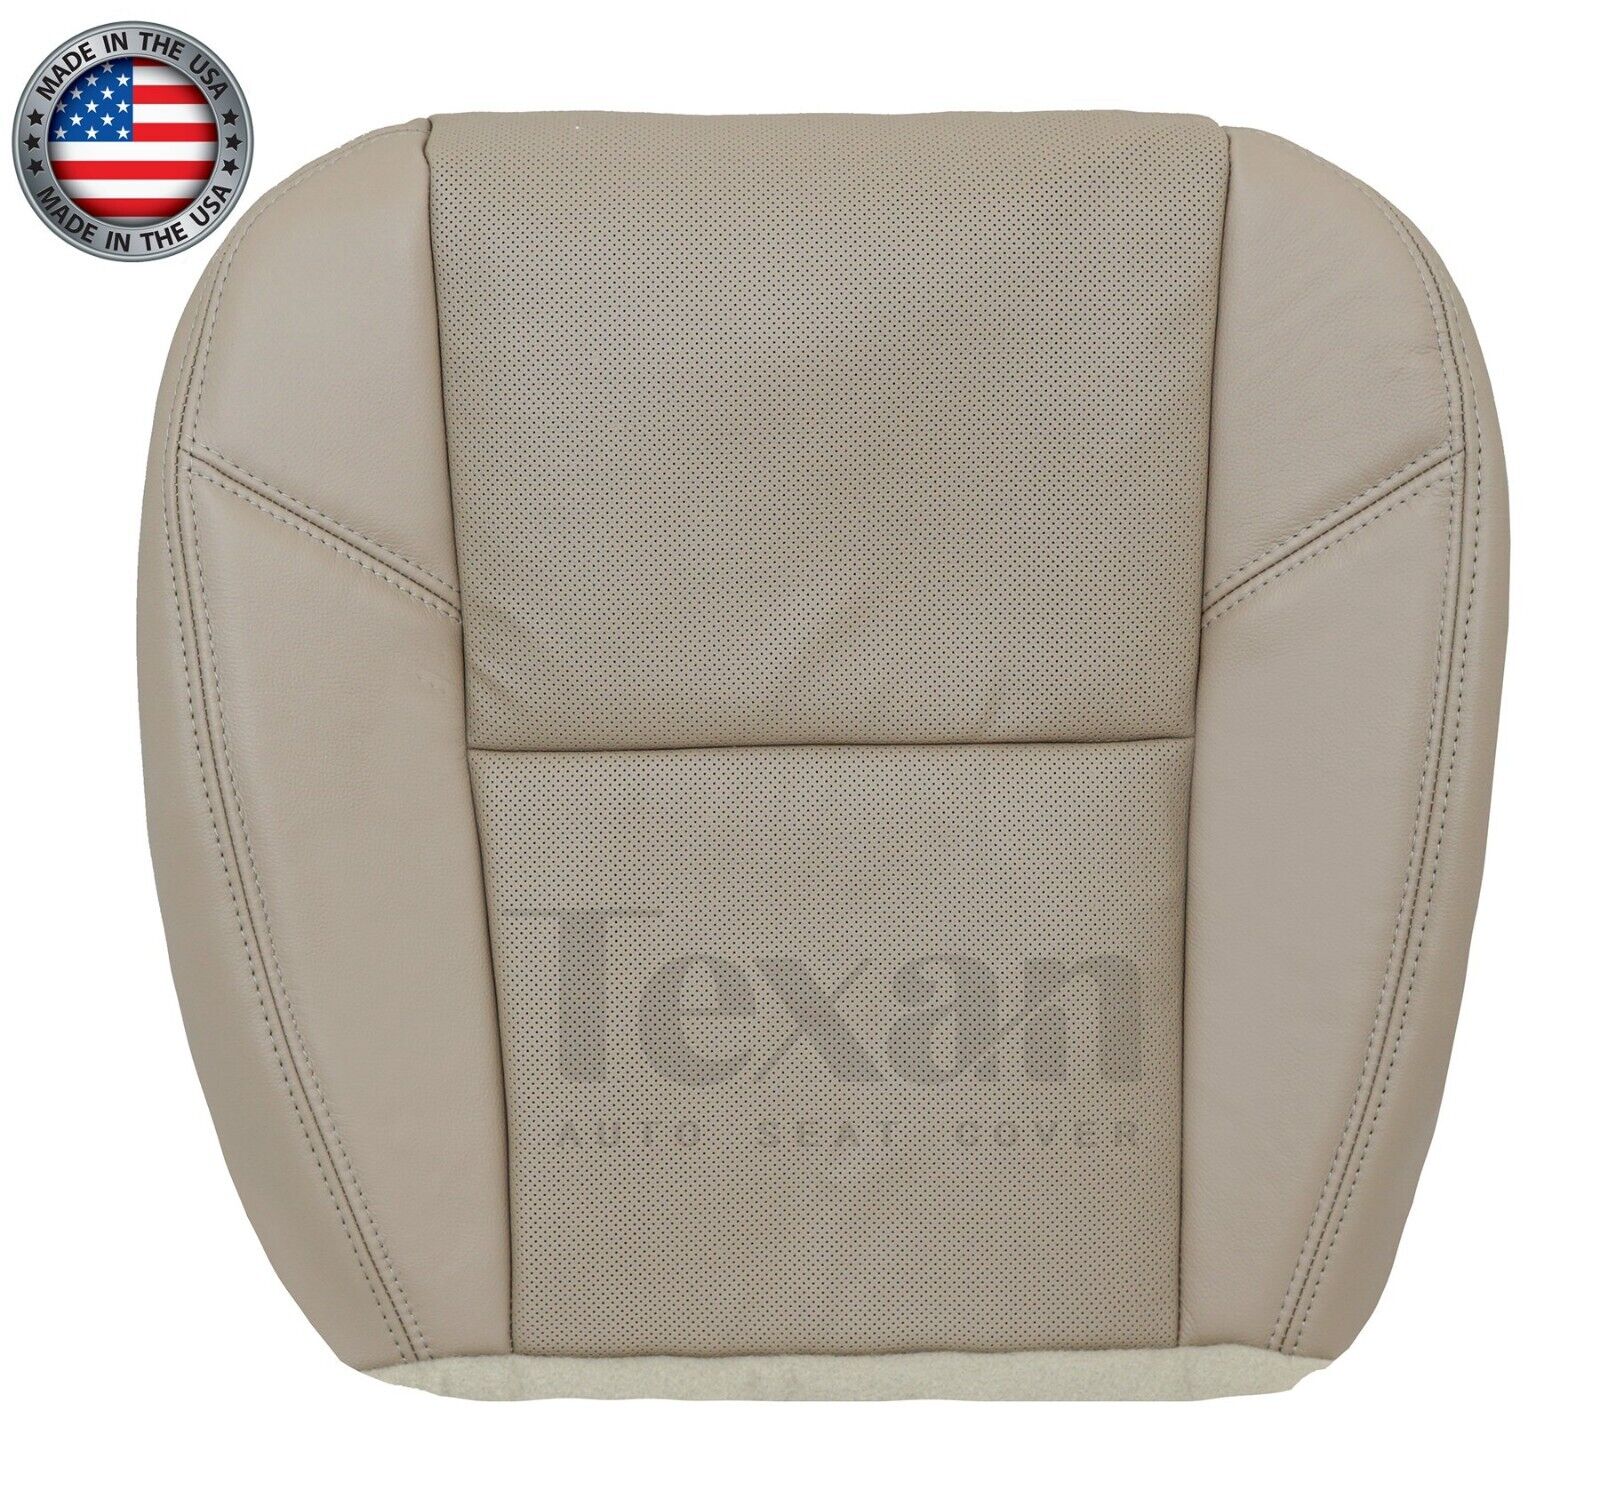 2009, 2020, 2011, 2012, 2013 Chevy Avalanche LTZ Passenger Bottom Synthetic Leather Replacement Seat Cover Tan